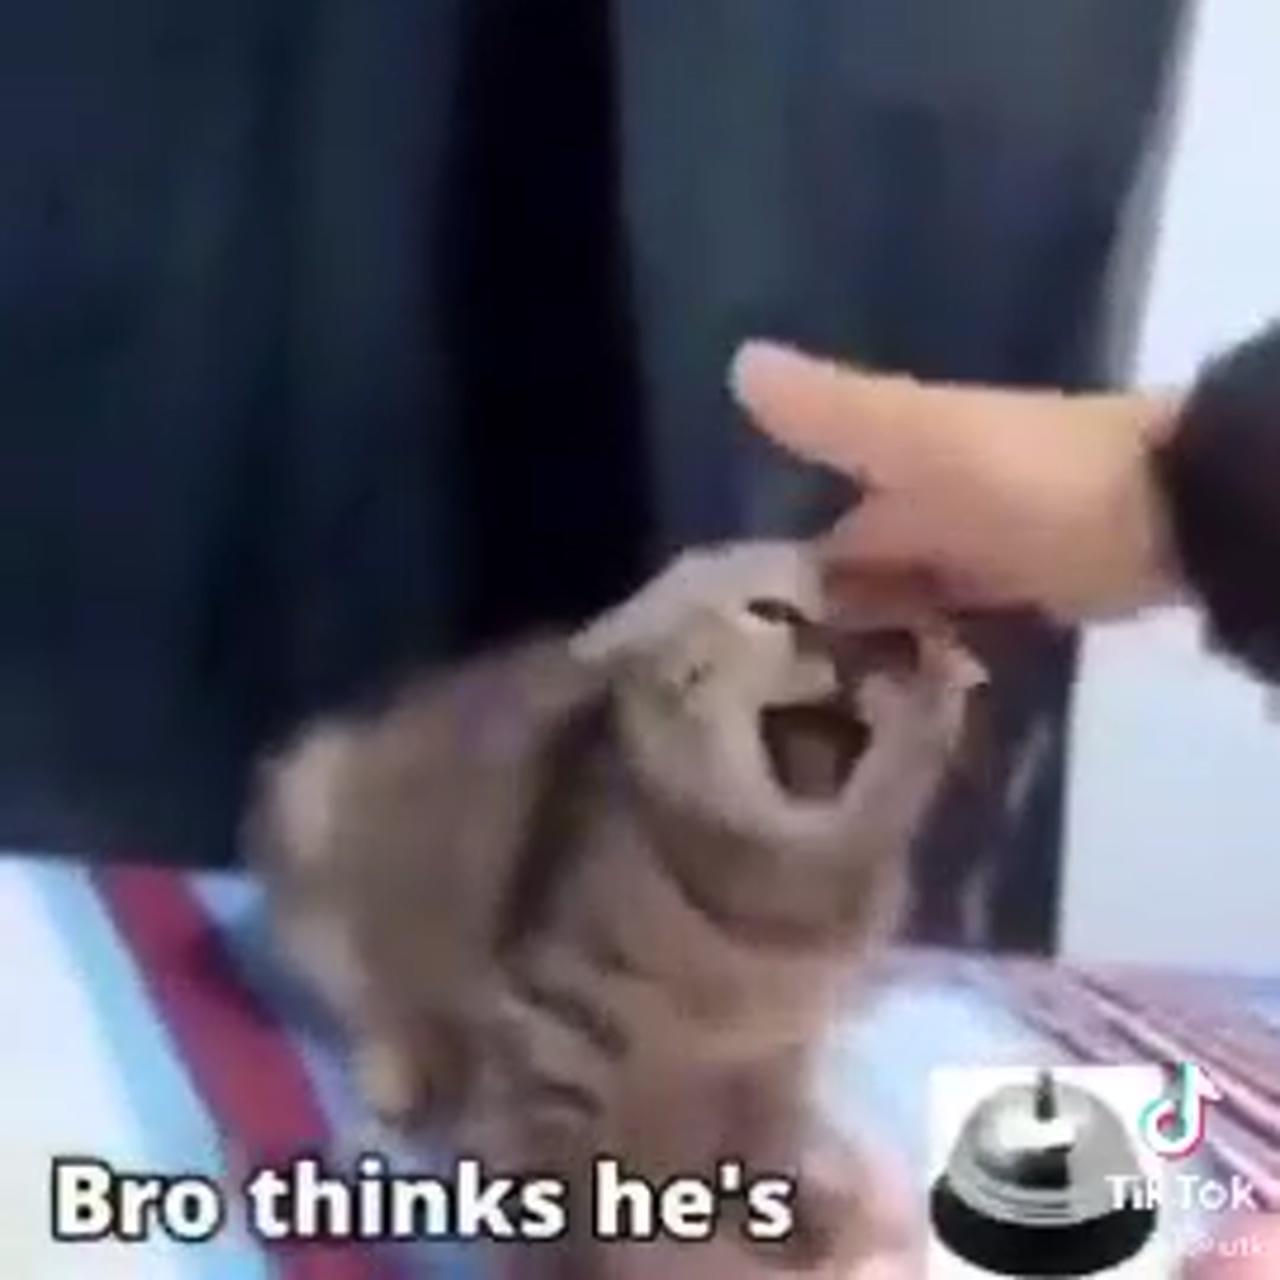 Bro thinks he's bell meme; funny cute cats